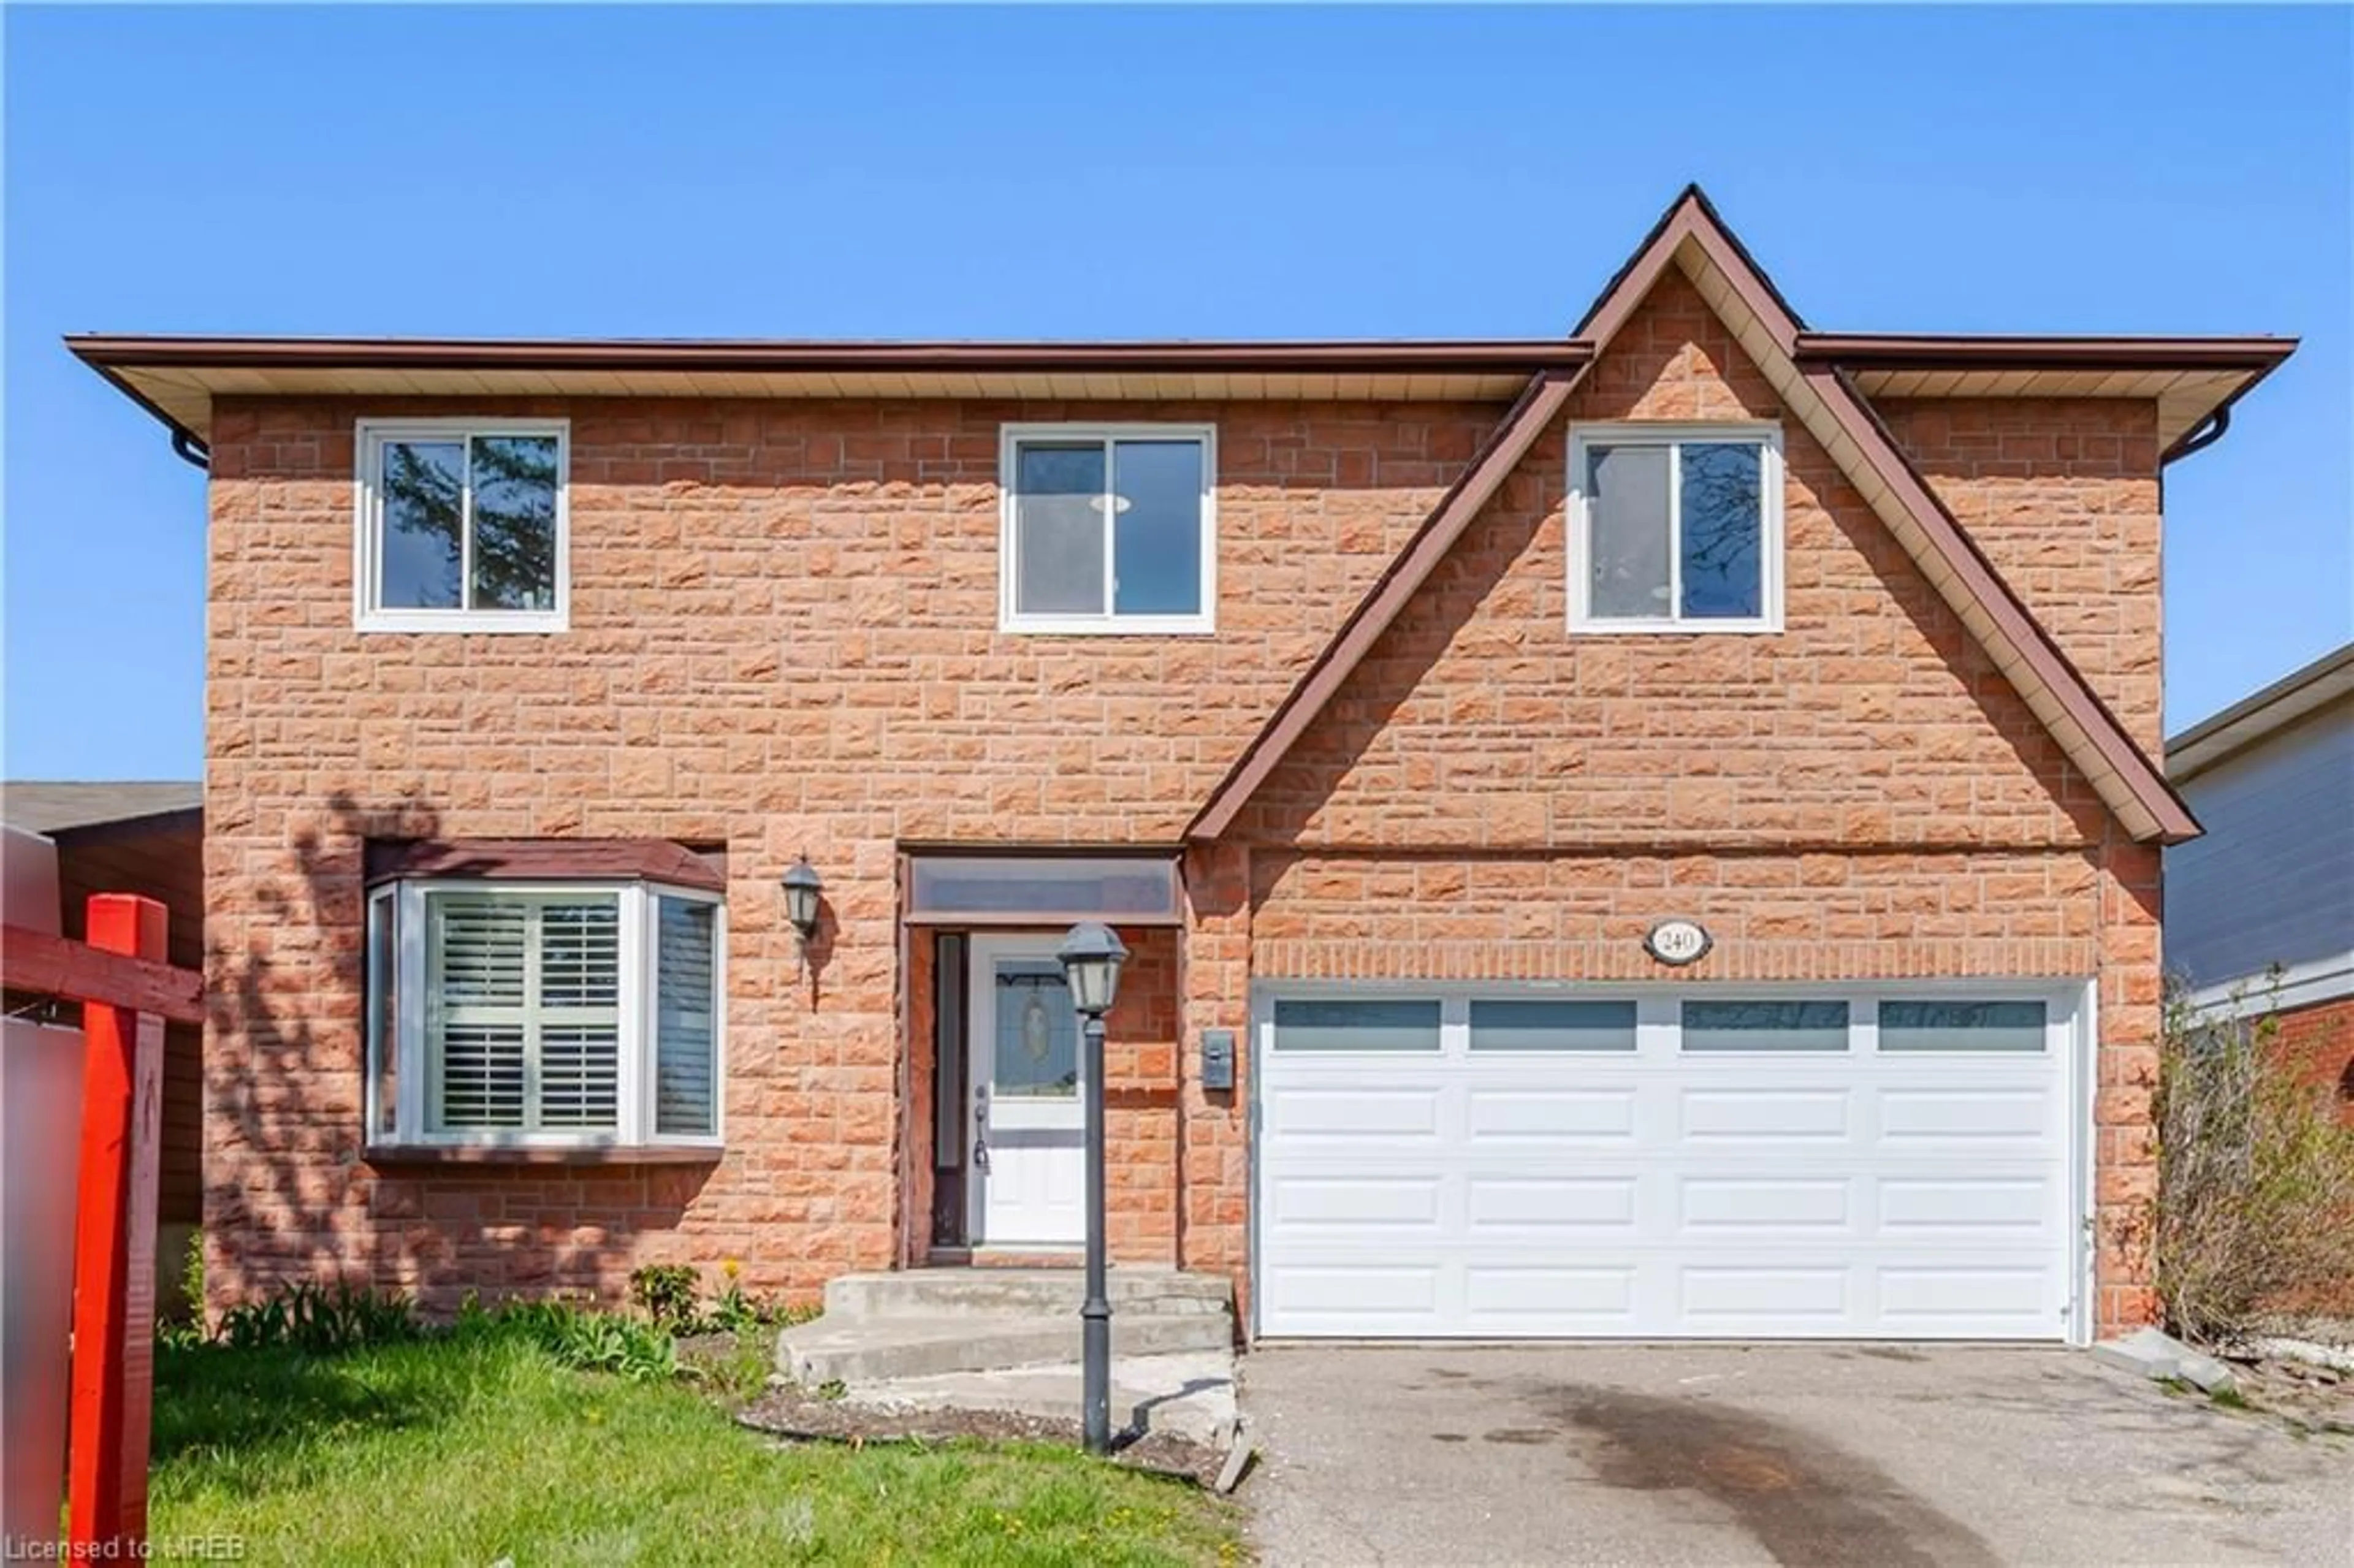 Home with brick exterior material for 240 Rutherford Rd, Brampton Ontario L6V 2X8